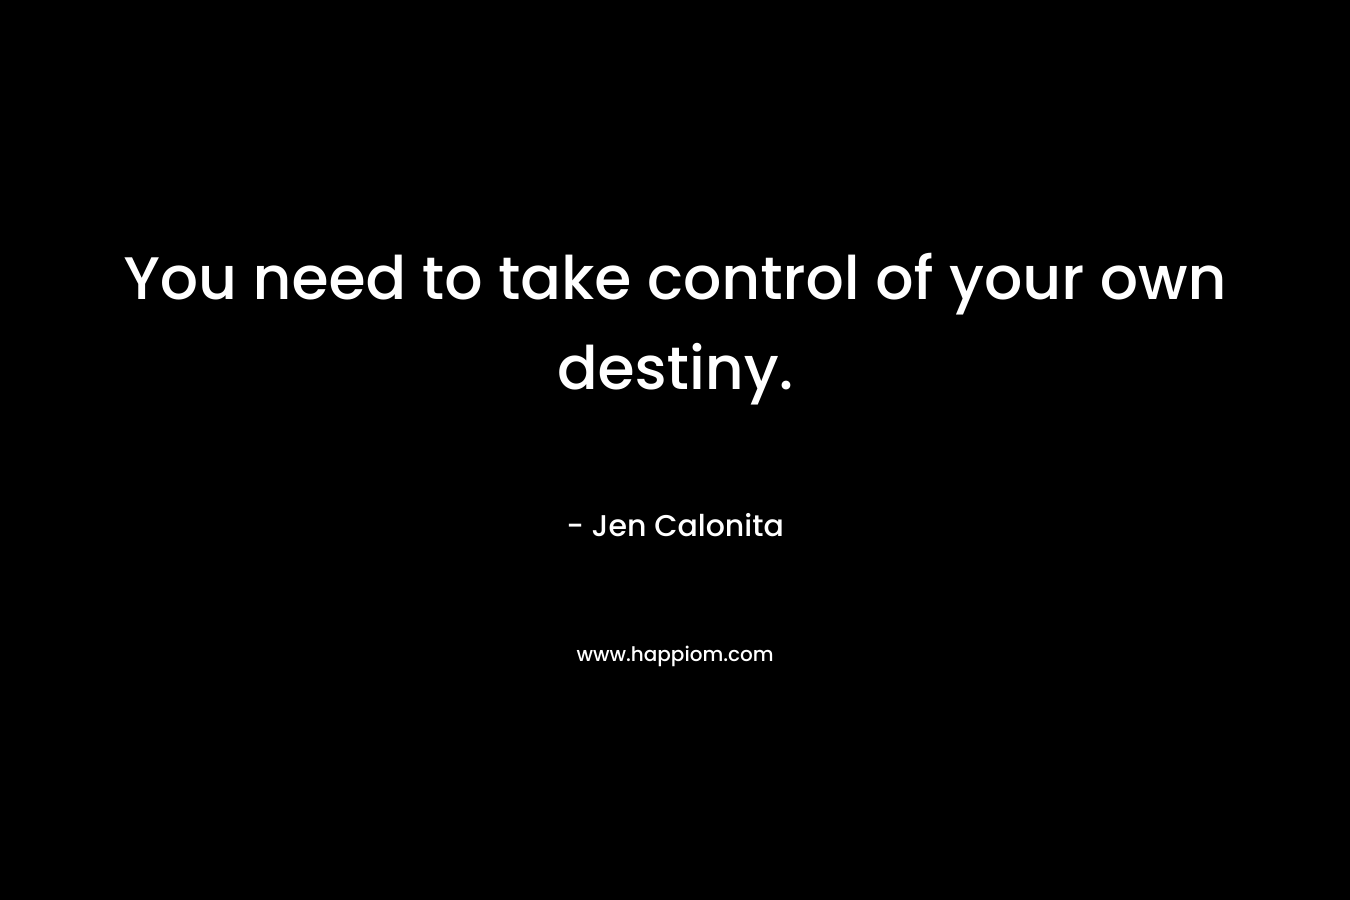 You need to take control of your own destiny. – Jen Calonita